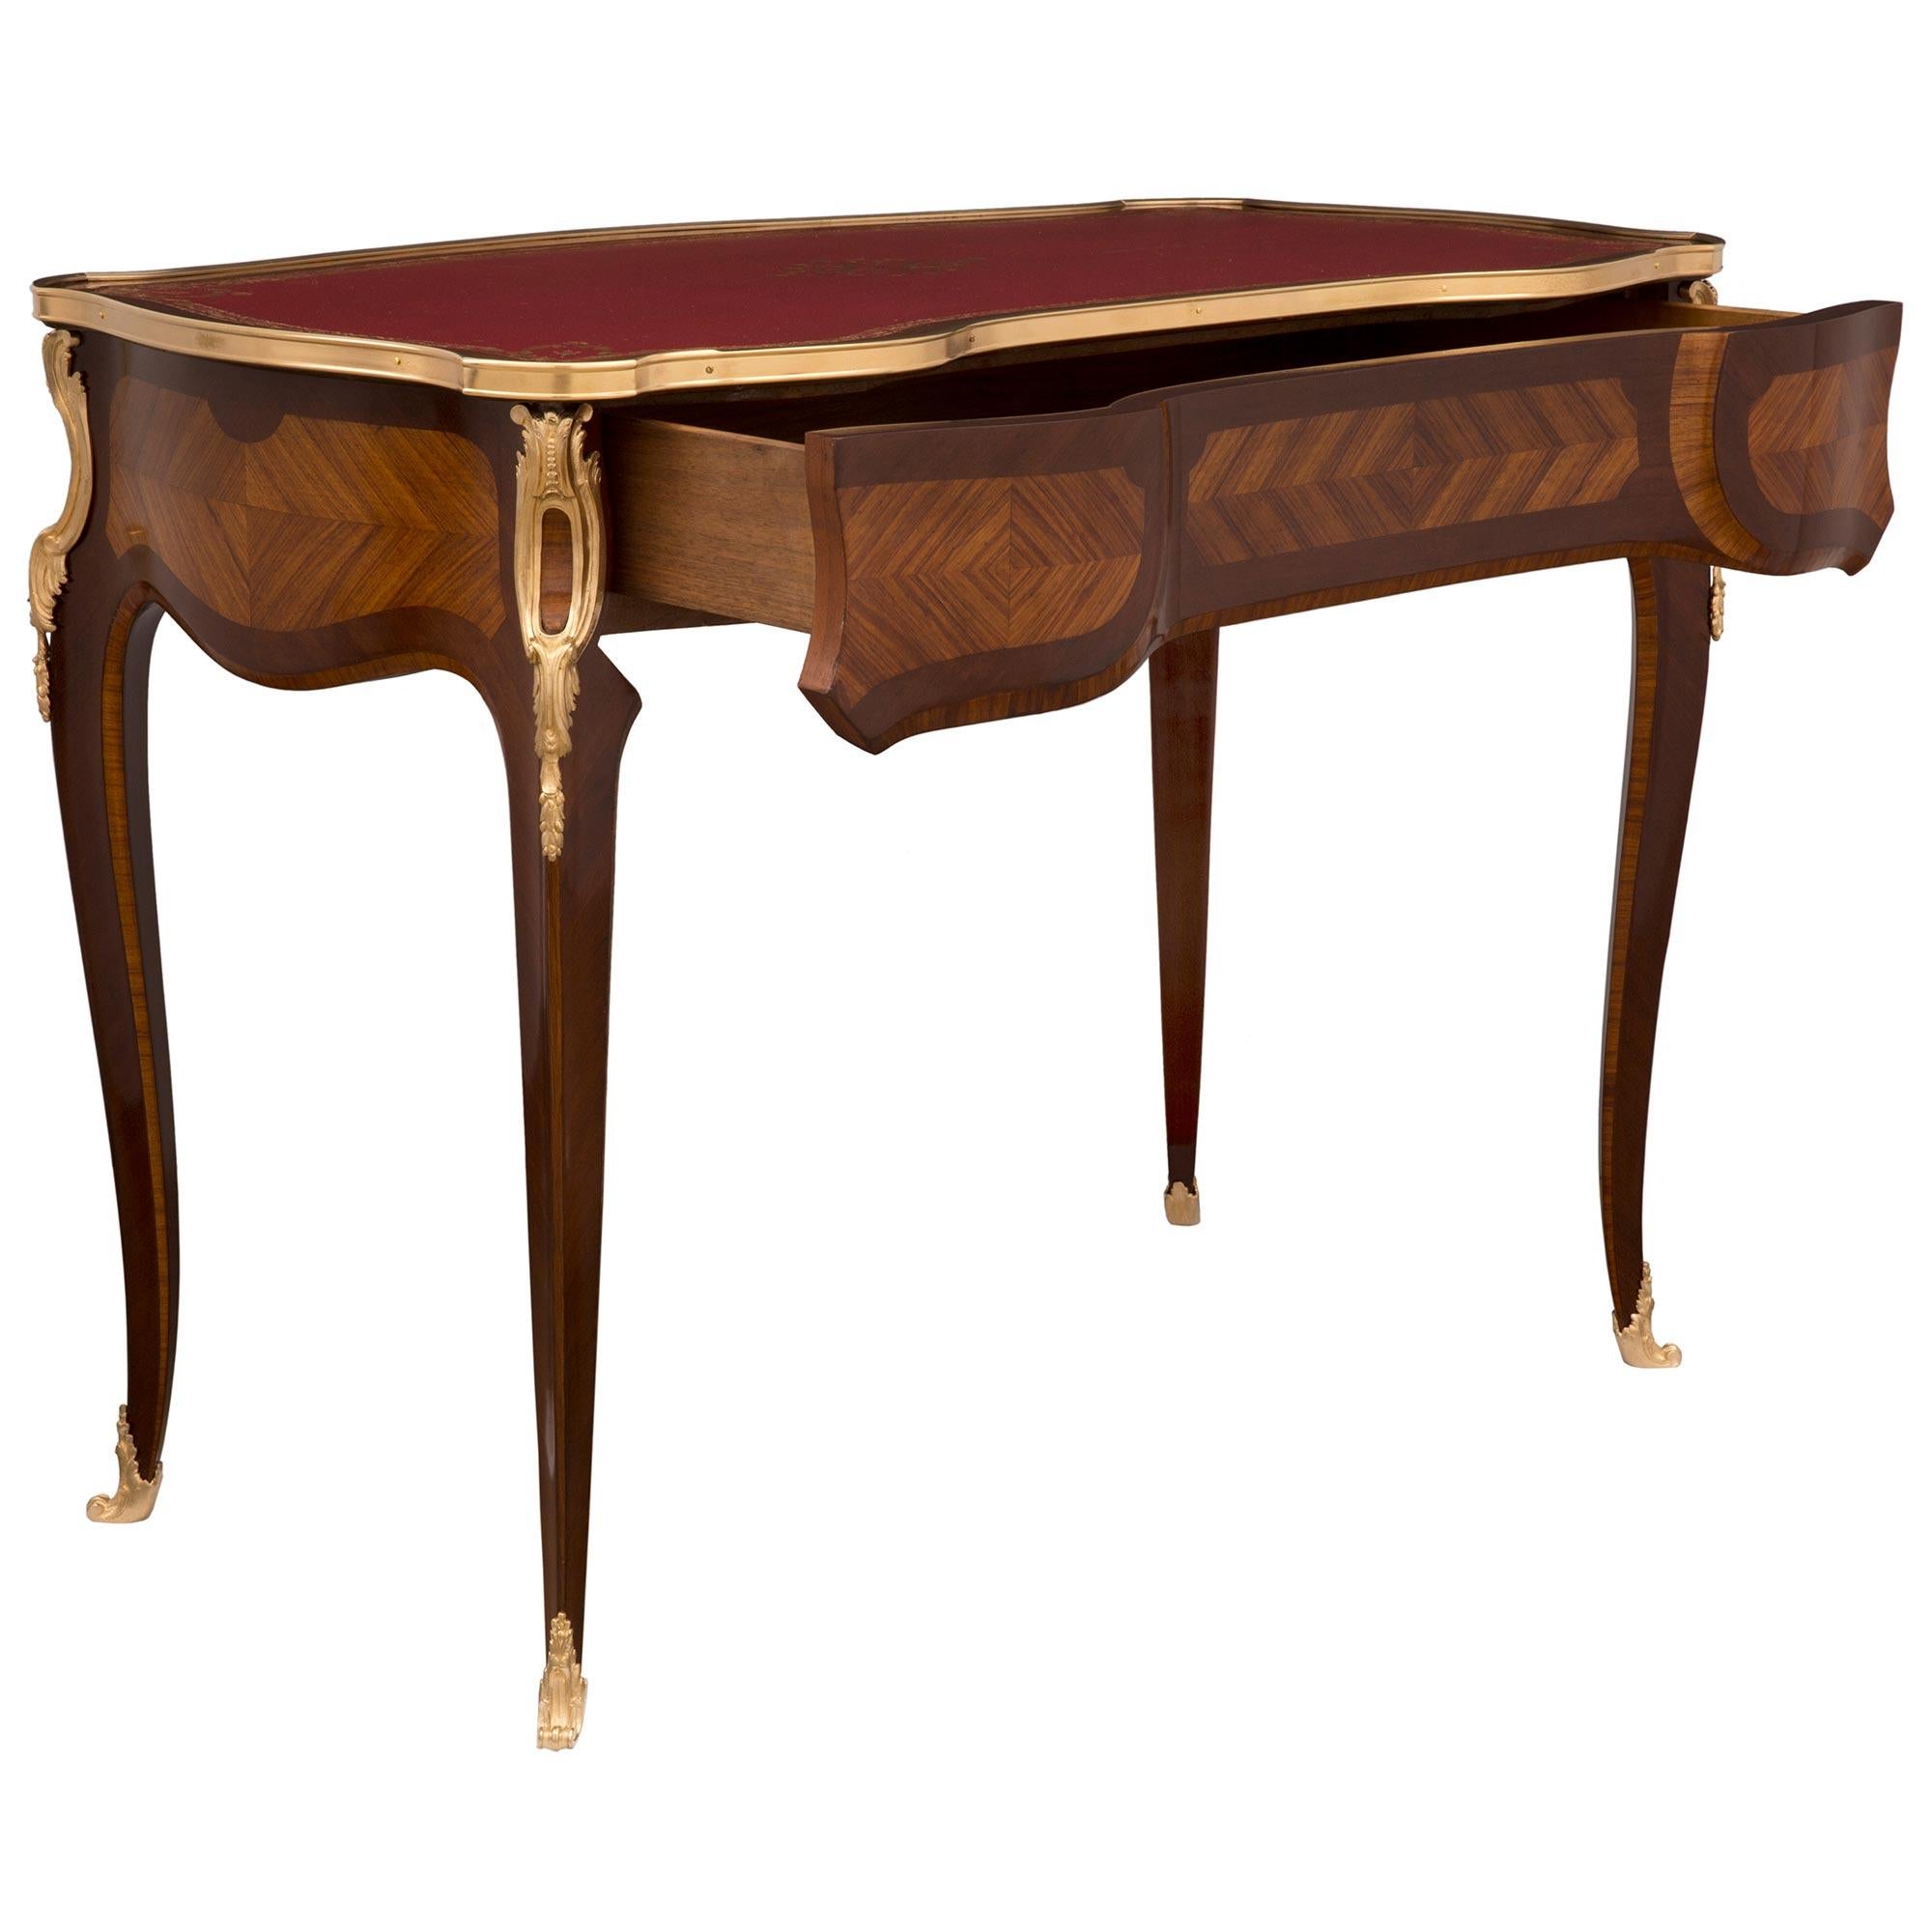 French 19th Century Louis XV St. Kingwood, Tulipwood and Ormolu Desk For Sale 1